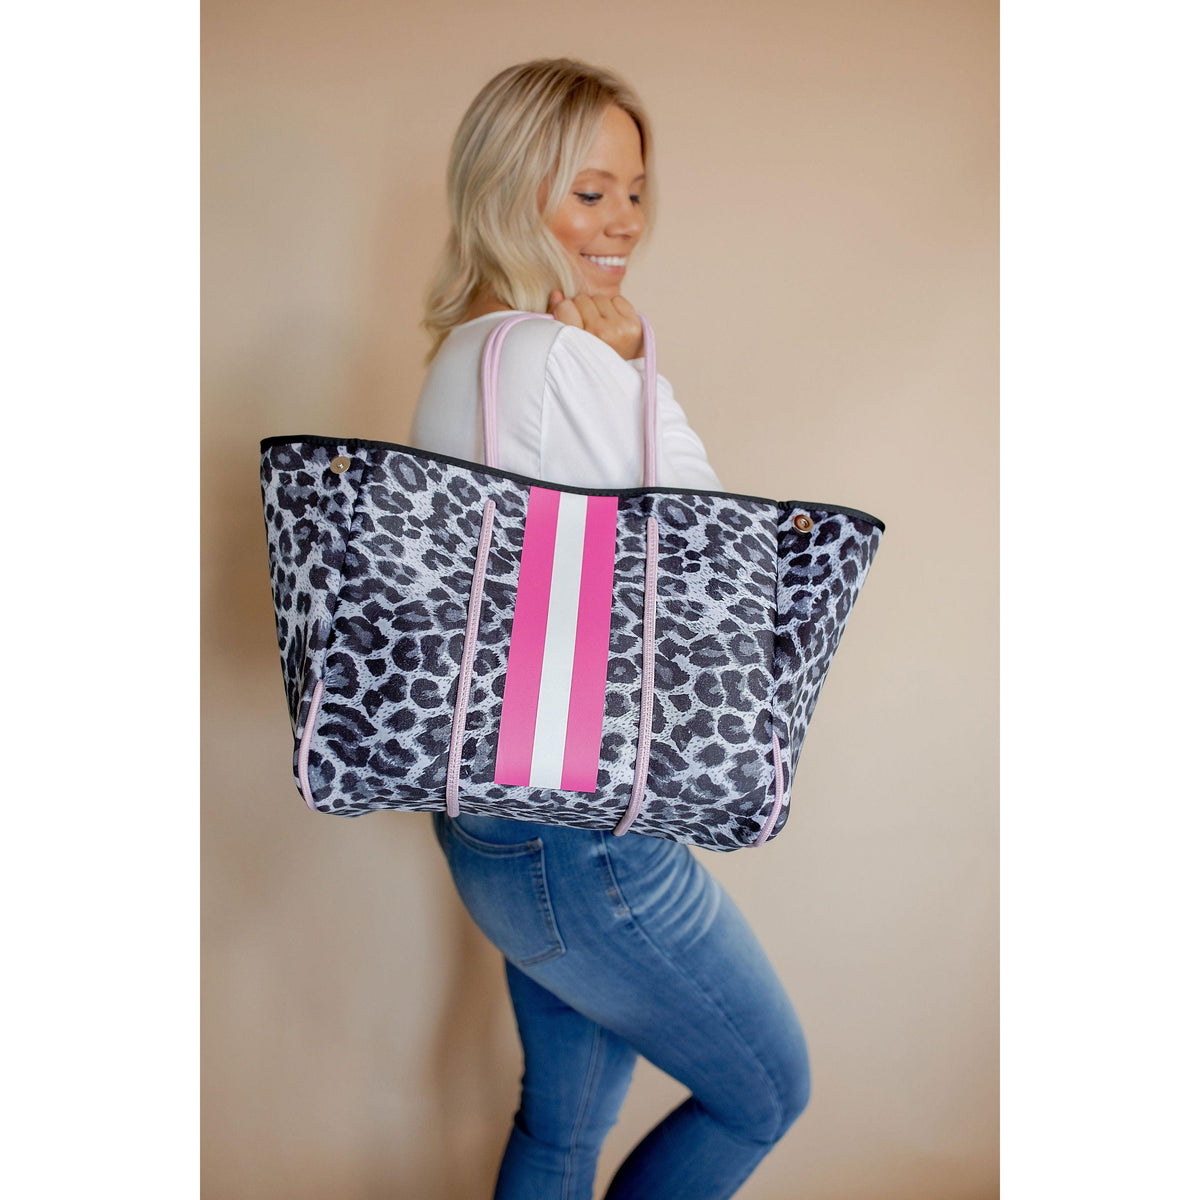 The Classy Cloth | Women's Neoprene Tote Bag | Waterproof Tote Black with Hot Pink and Orange Stripe